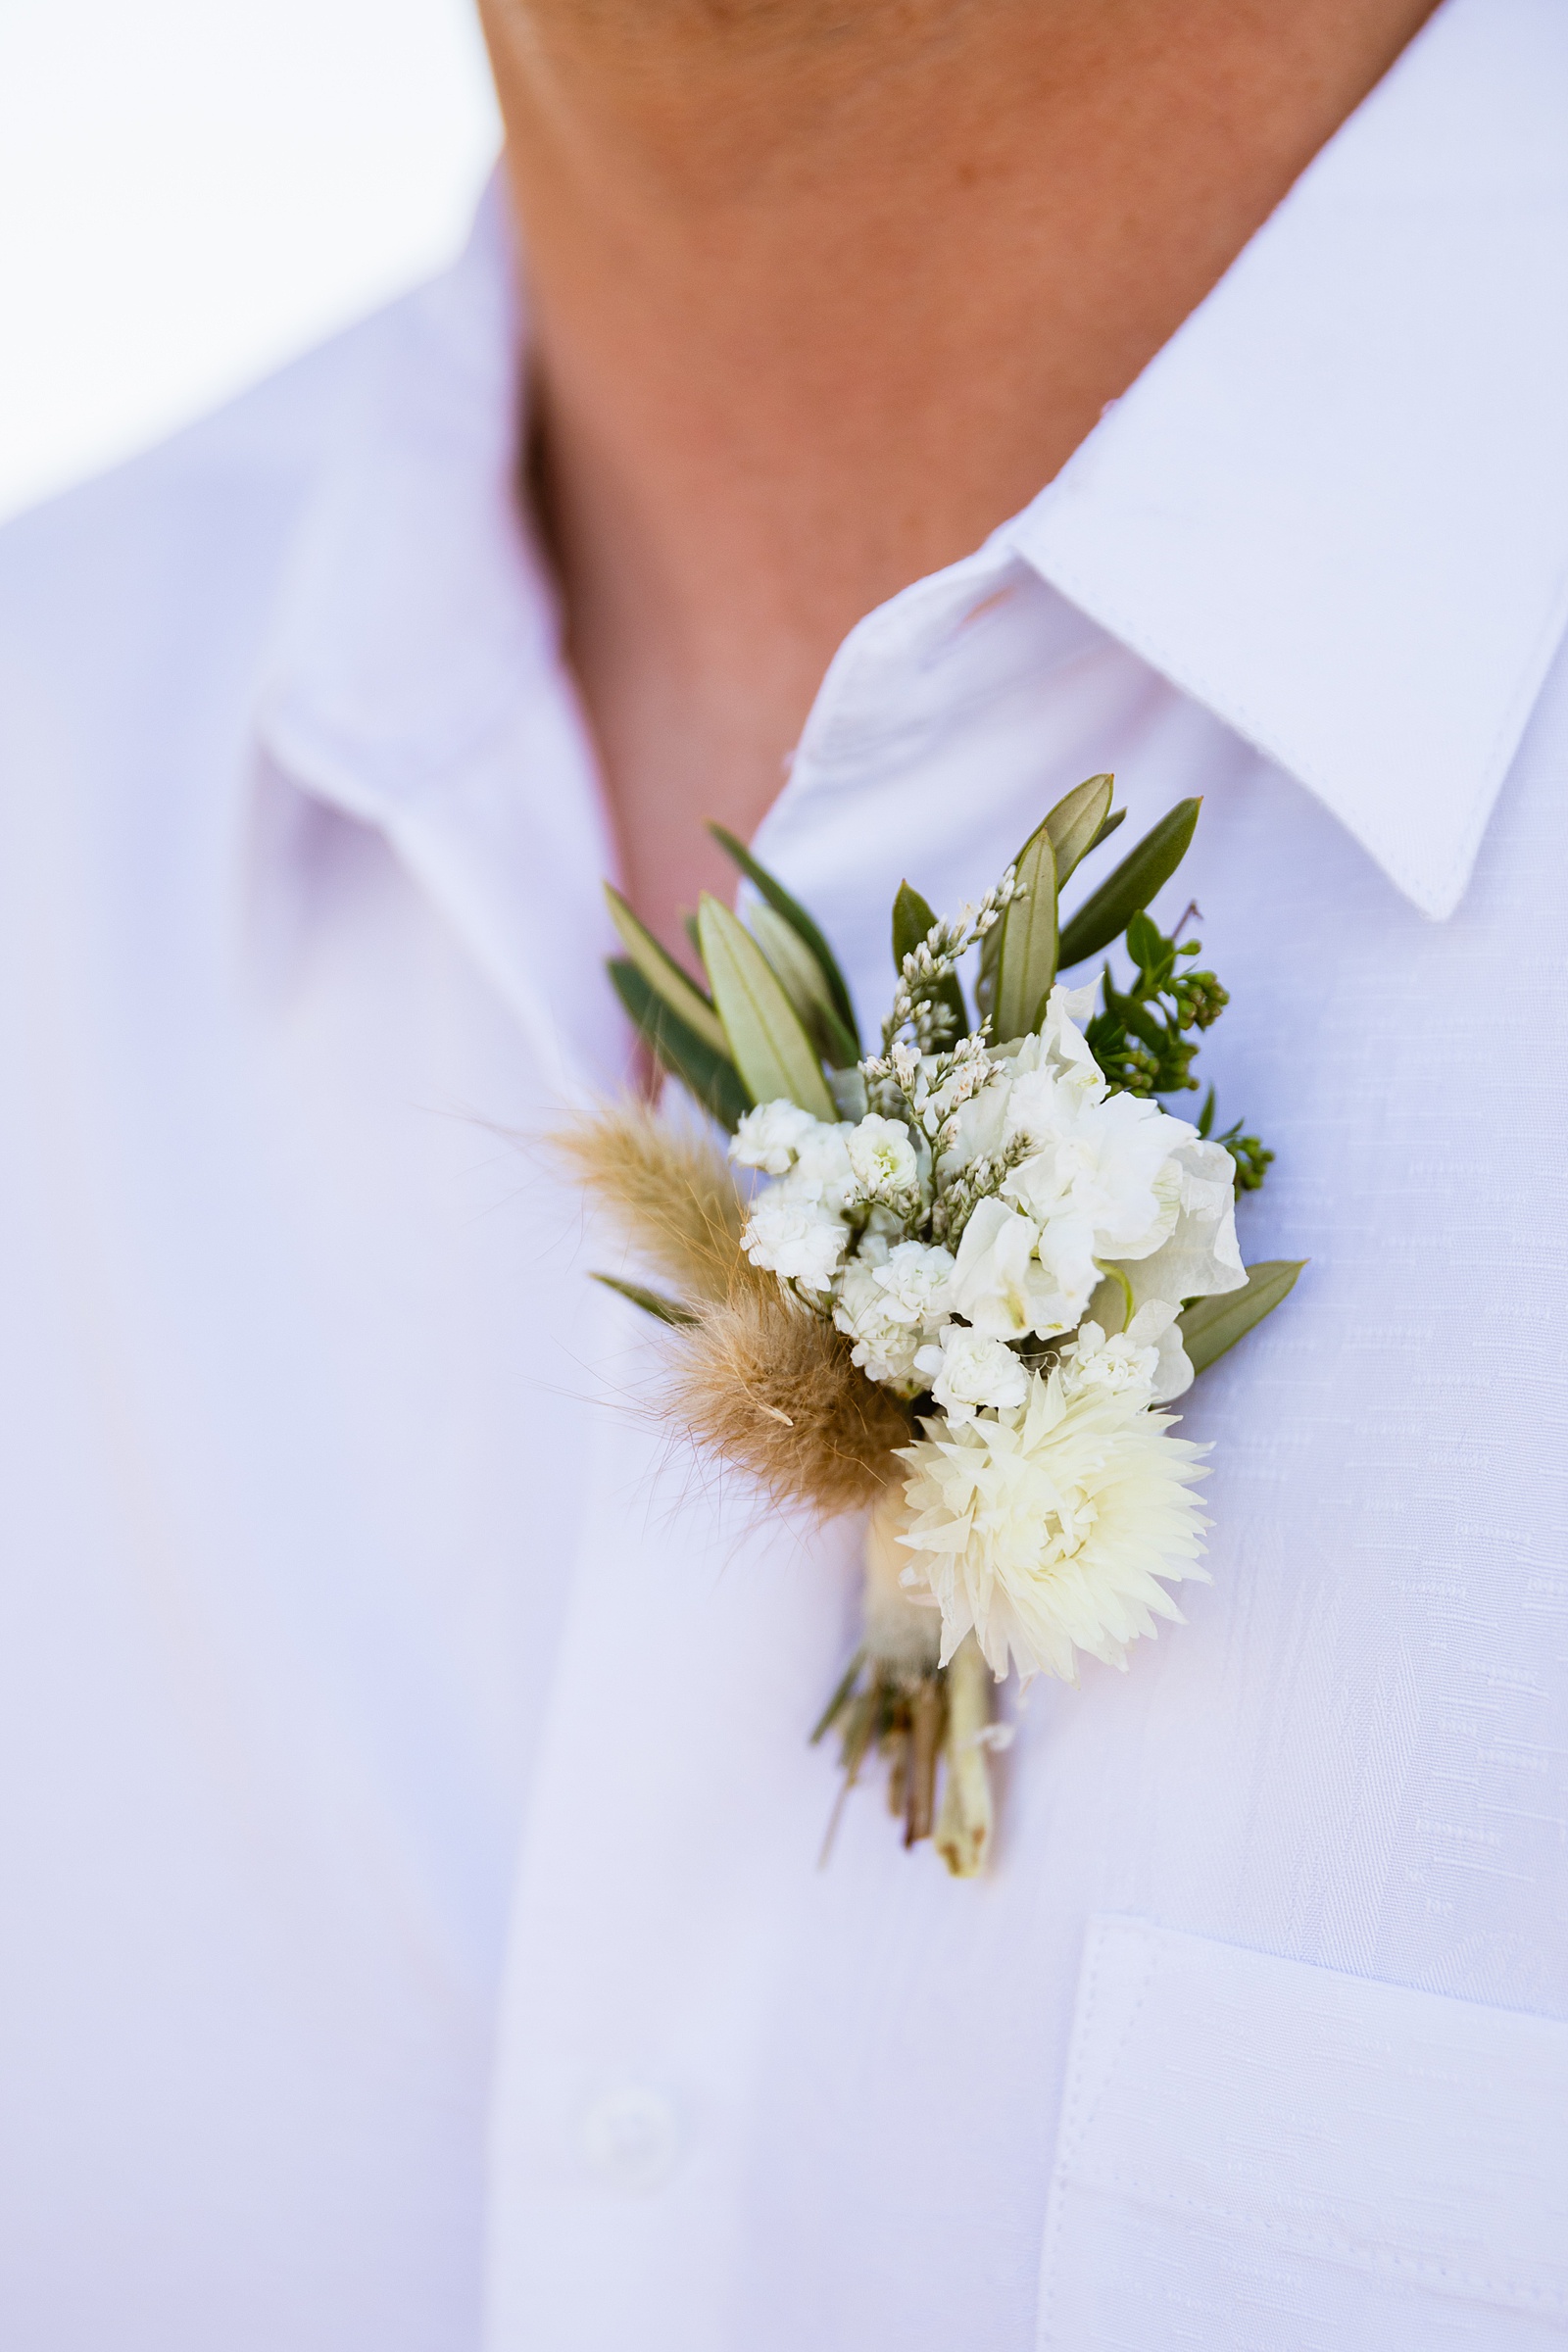 Groom's white and cream wild, freeform boutonniere by PMA Photography.